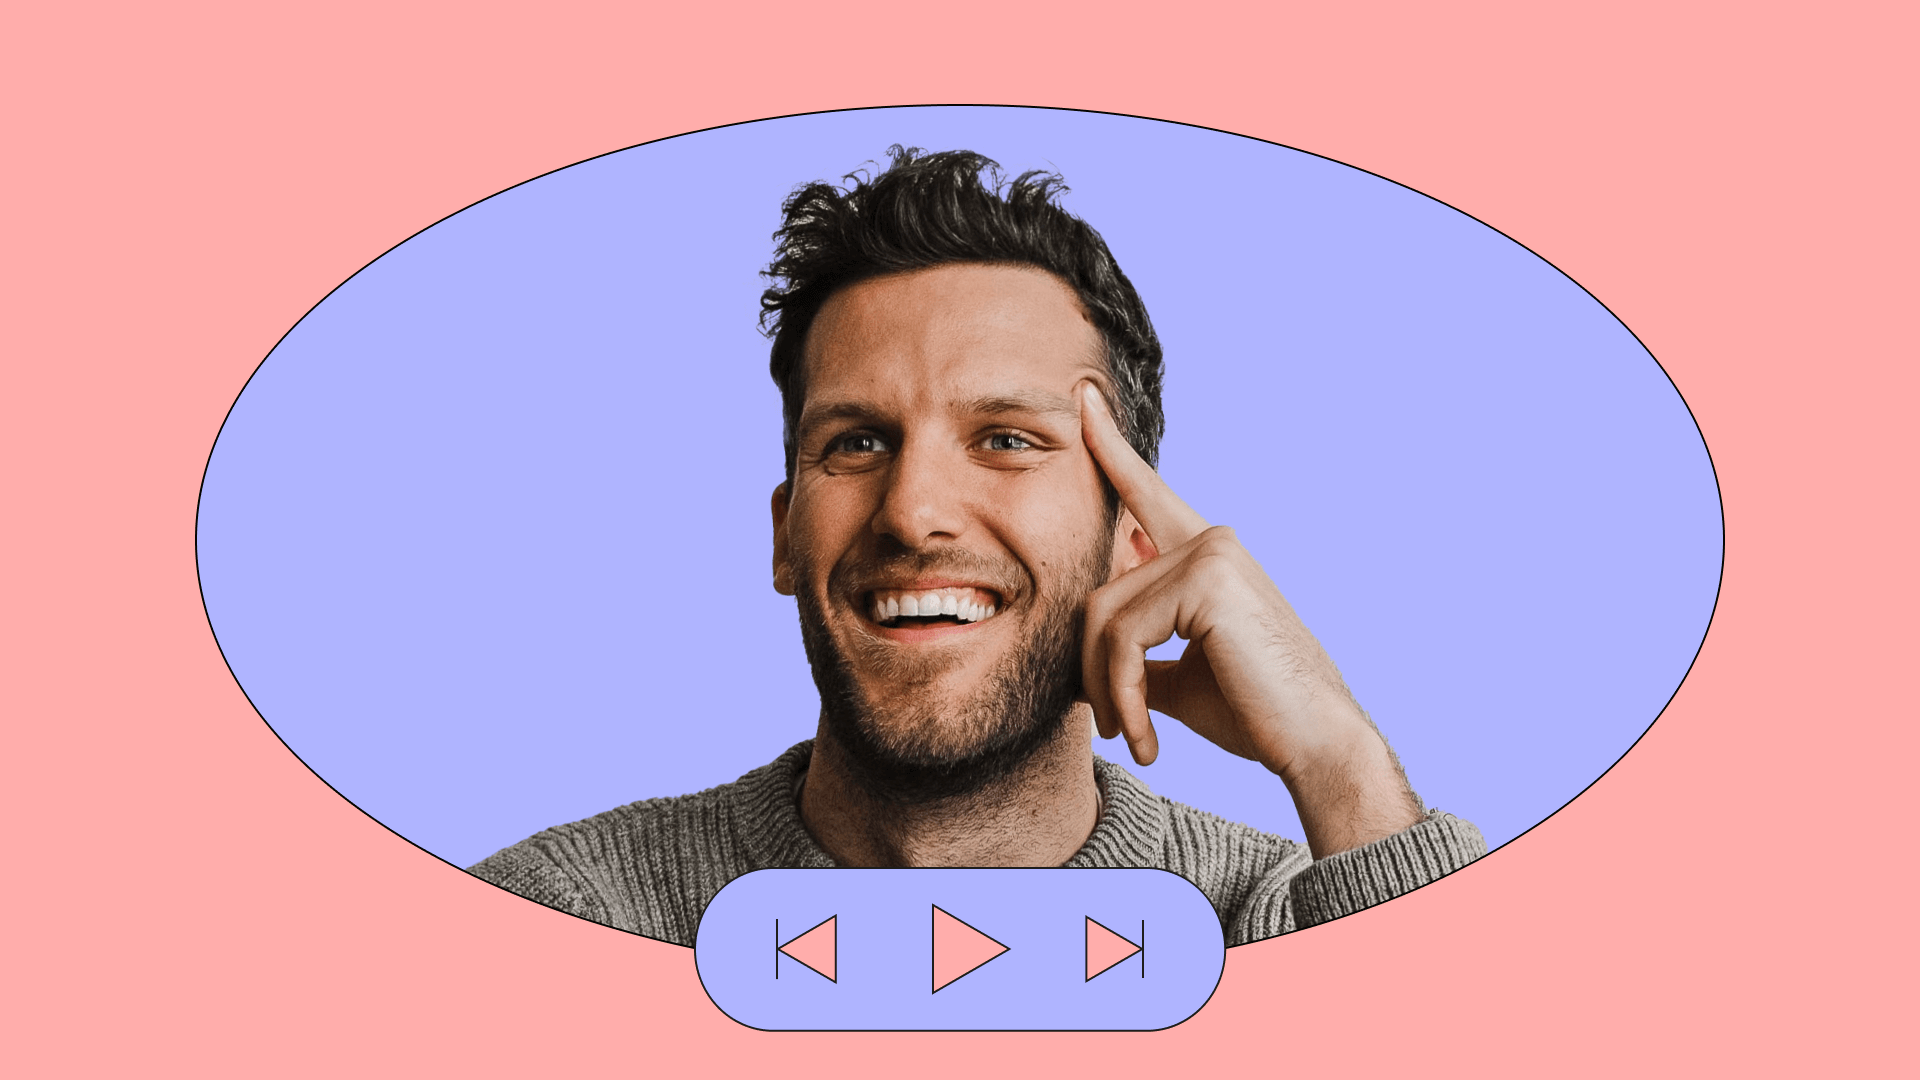 Headshot of kurtis smeaton, Later’s influencer marketing manager, behind rewind, play, and fast-forward buttons